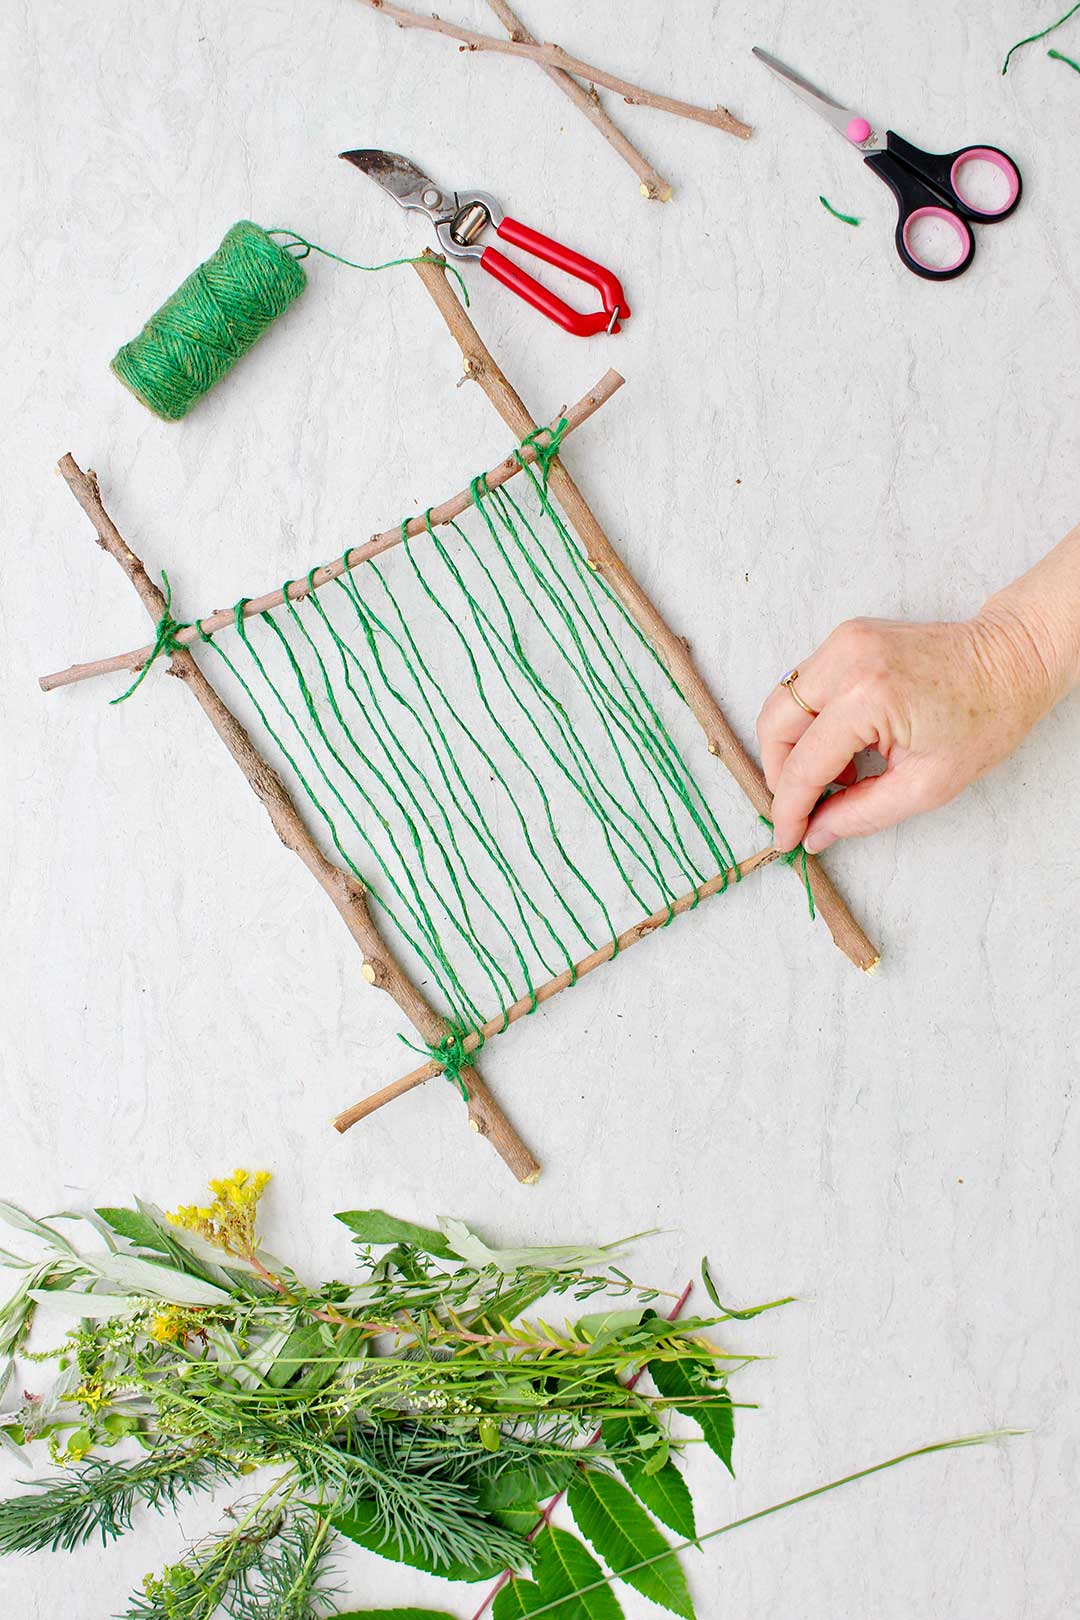 Hand wrapping green string around loom made from twigs with supplies for nature weaving near by.